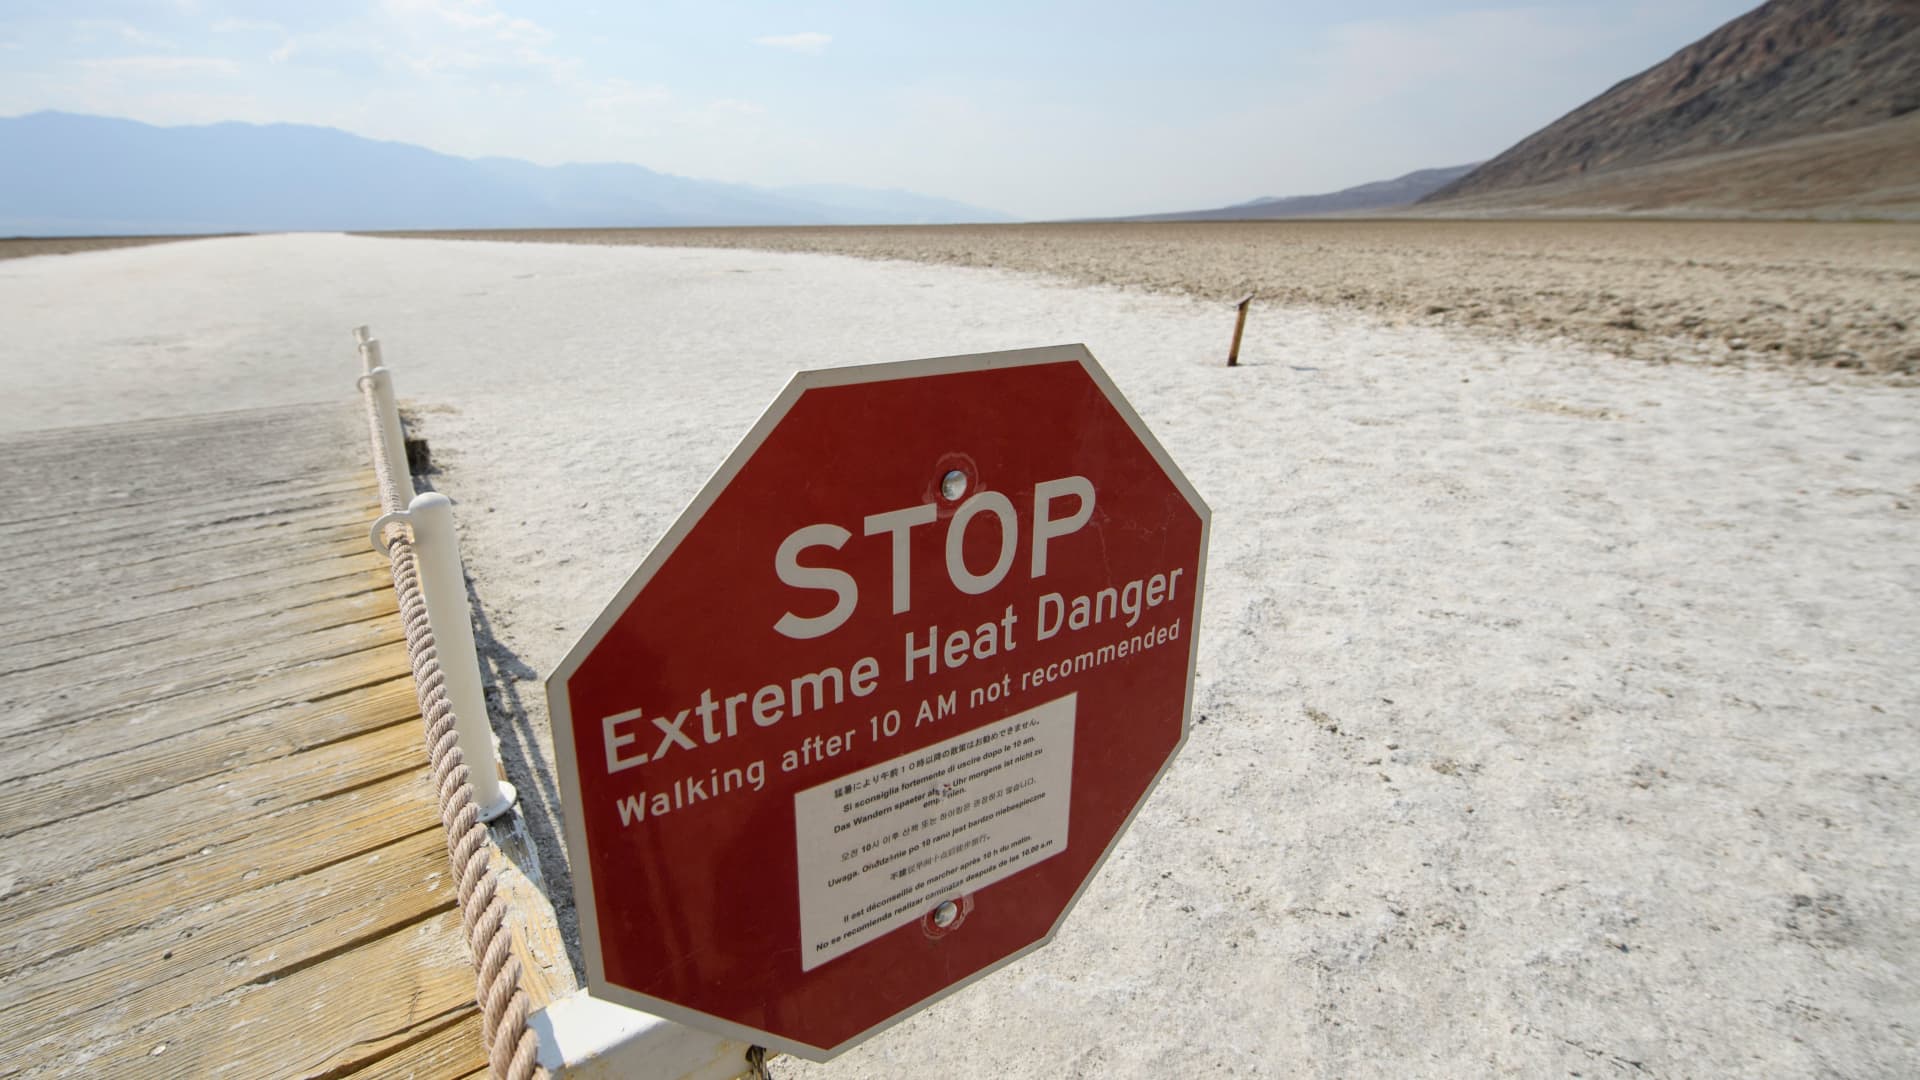 Signage warns of extreme heat danger at the salt flats of Badwater Basin inside Death Valley National Park on June 17, 2021 in Inyo County, California.